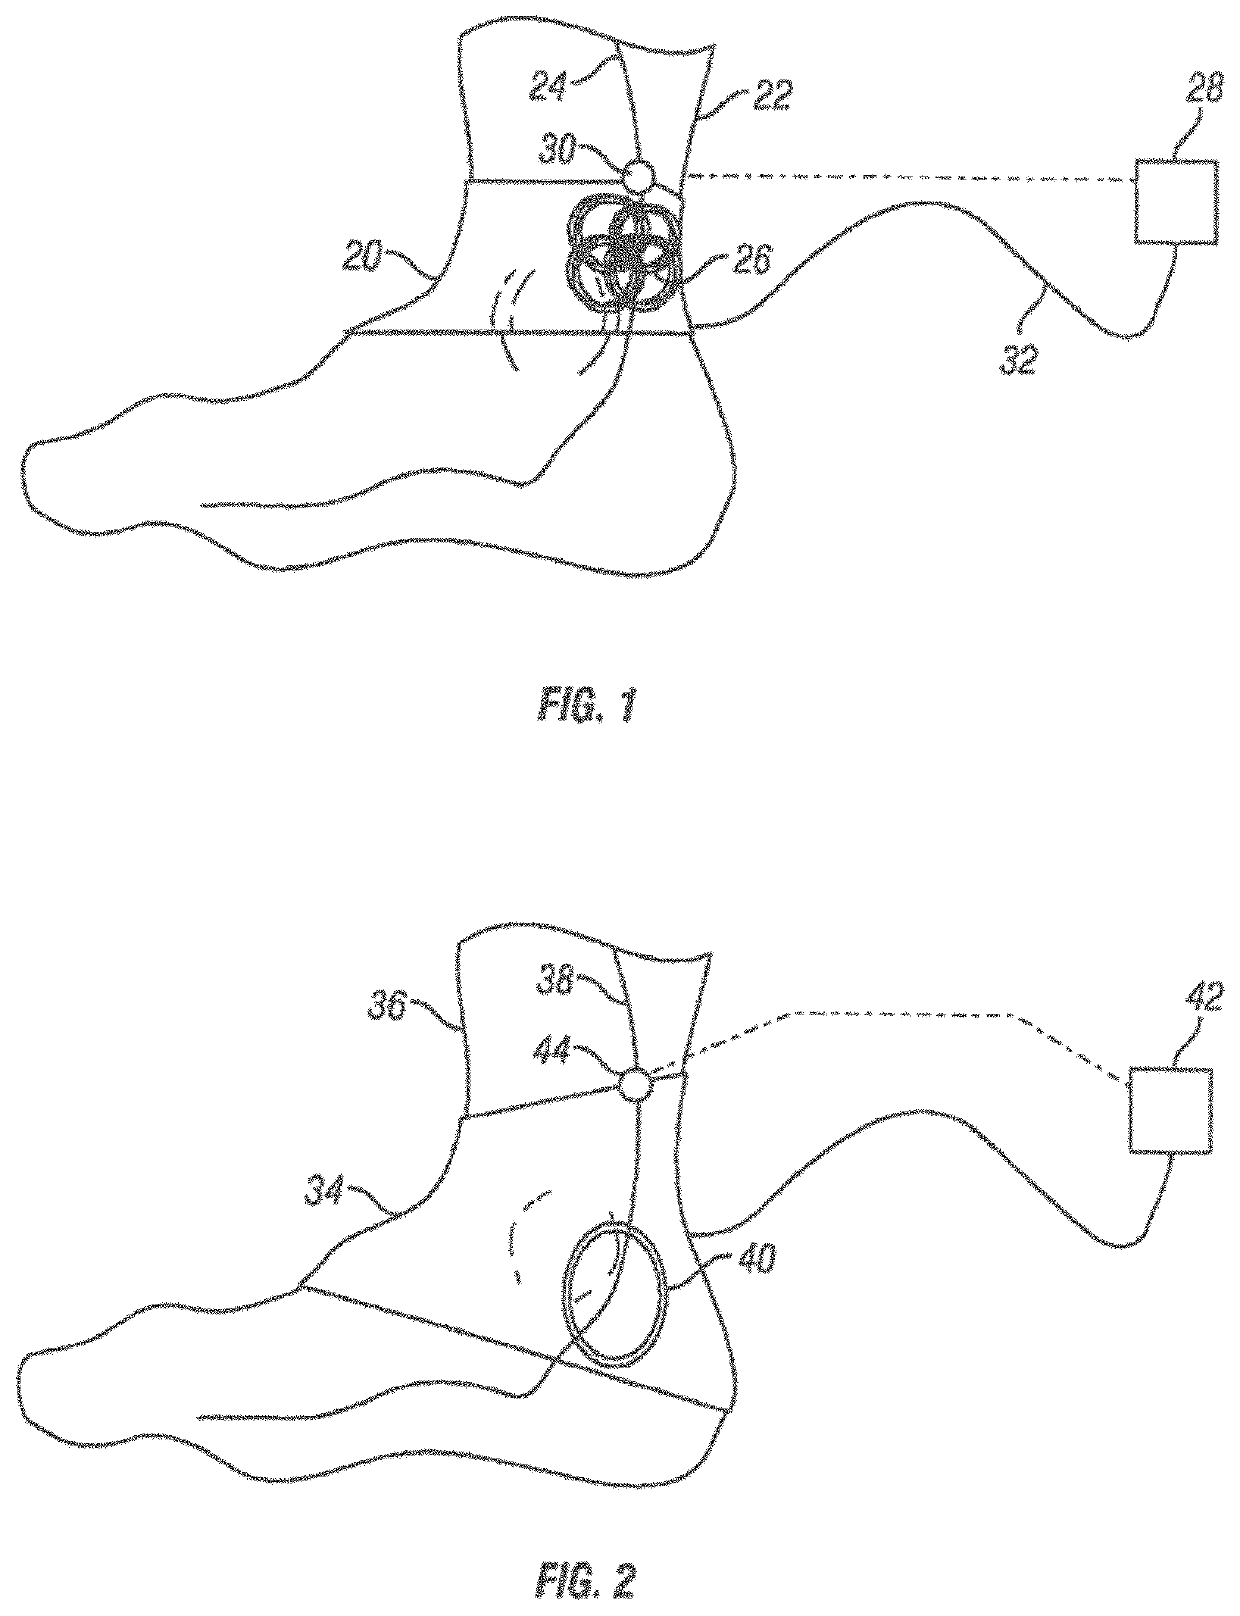 Method and apparatus for transdermal stimulation over the palmar and plantar surfaces